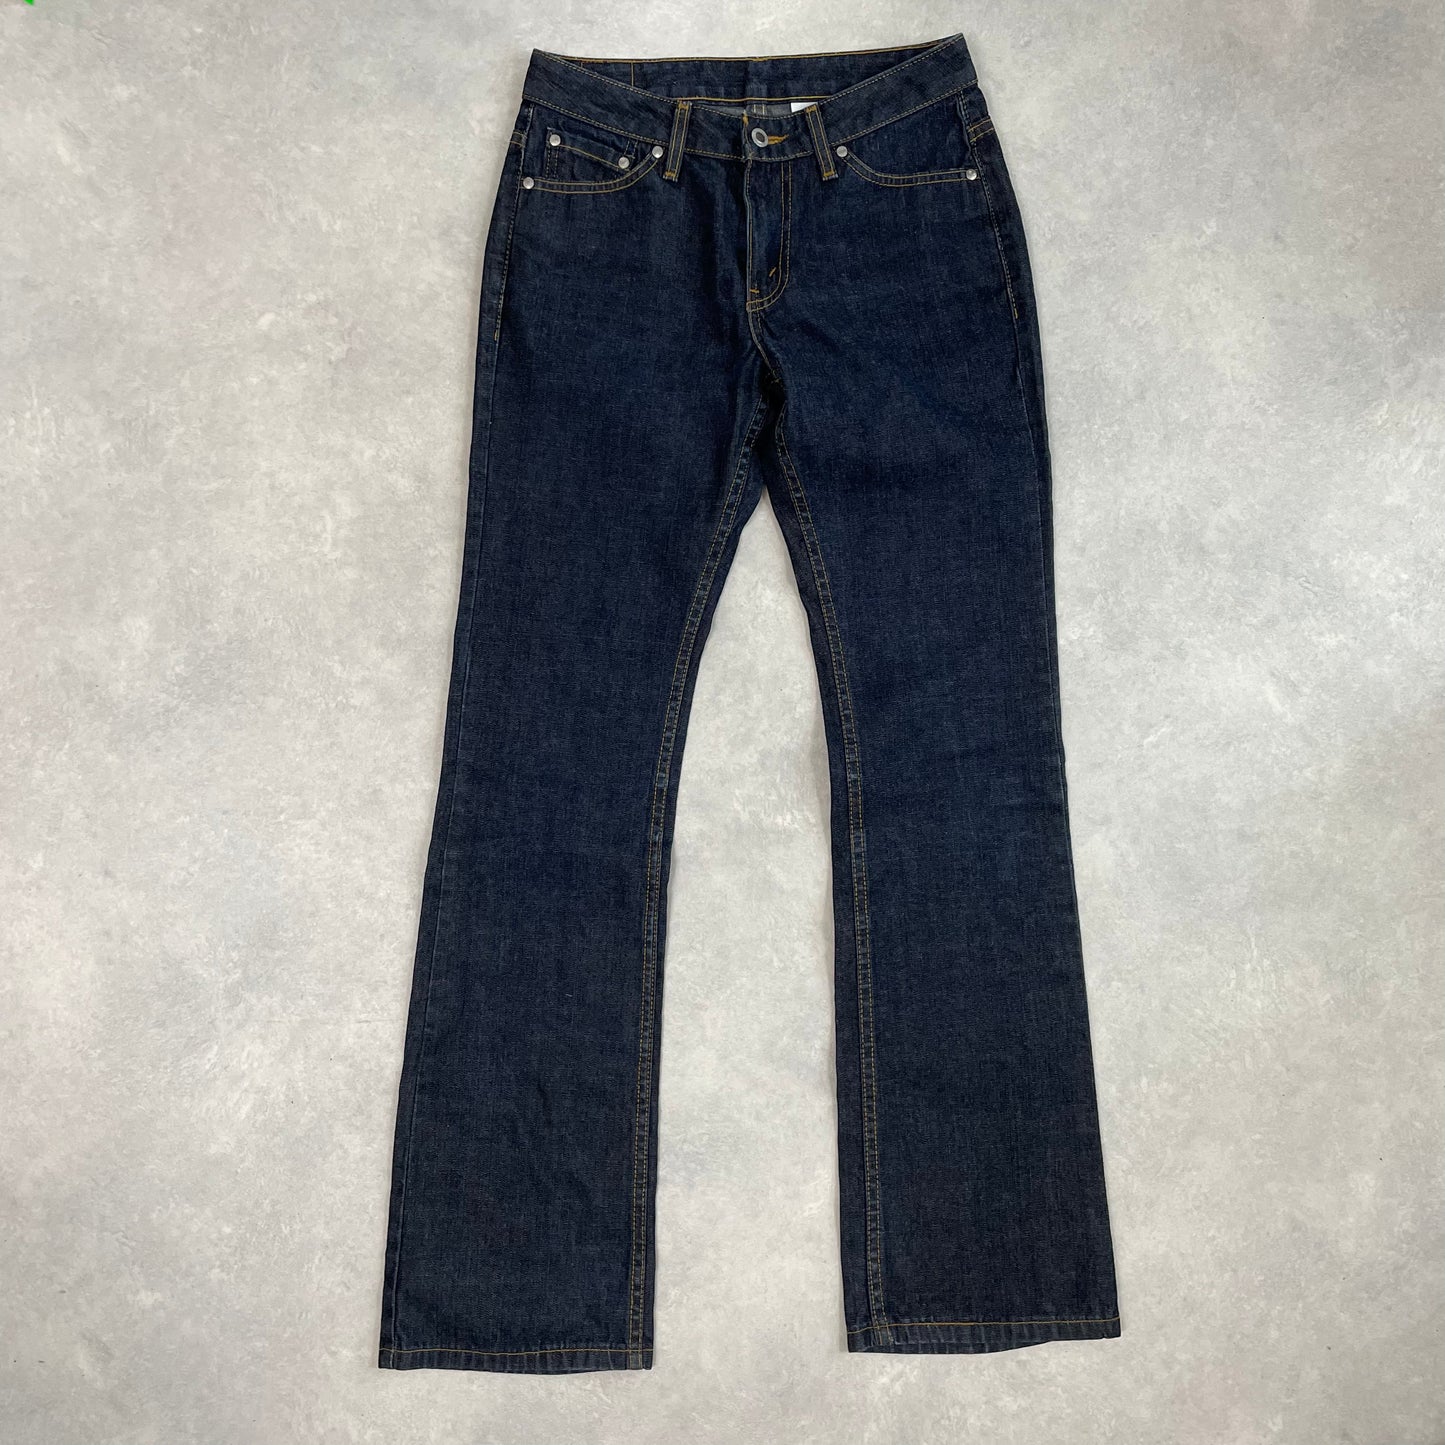 Vintage Levi’s Silvertab Jeans Made in Canada